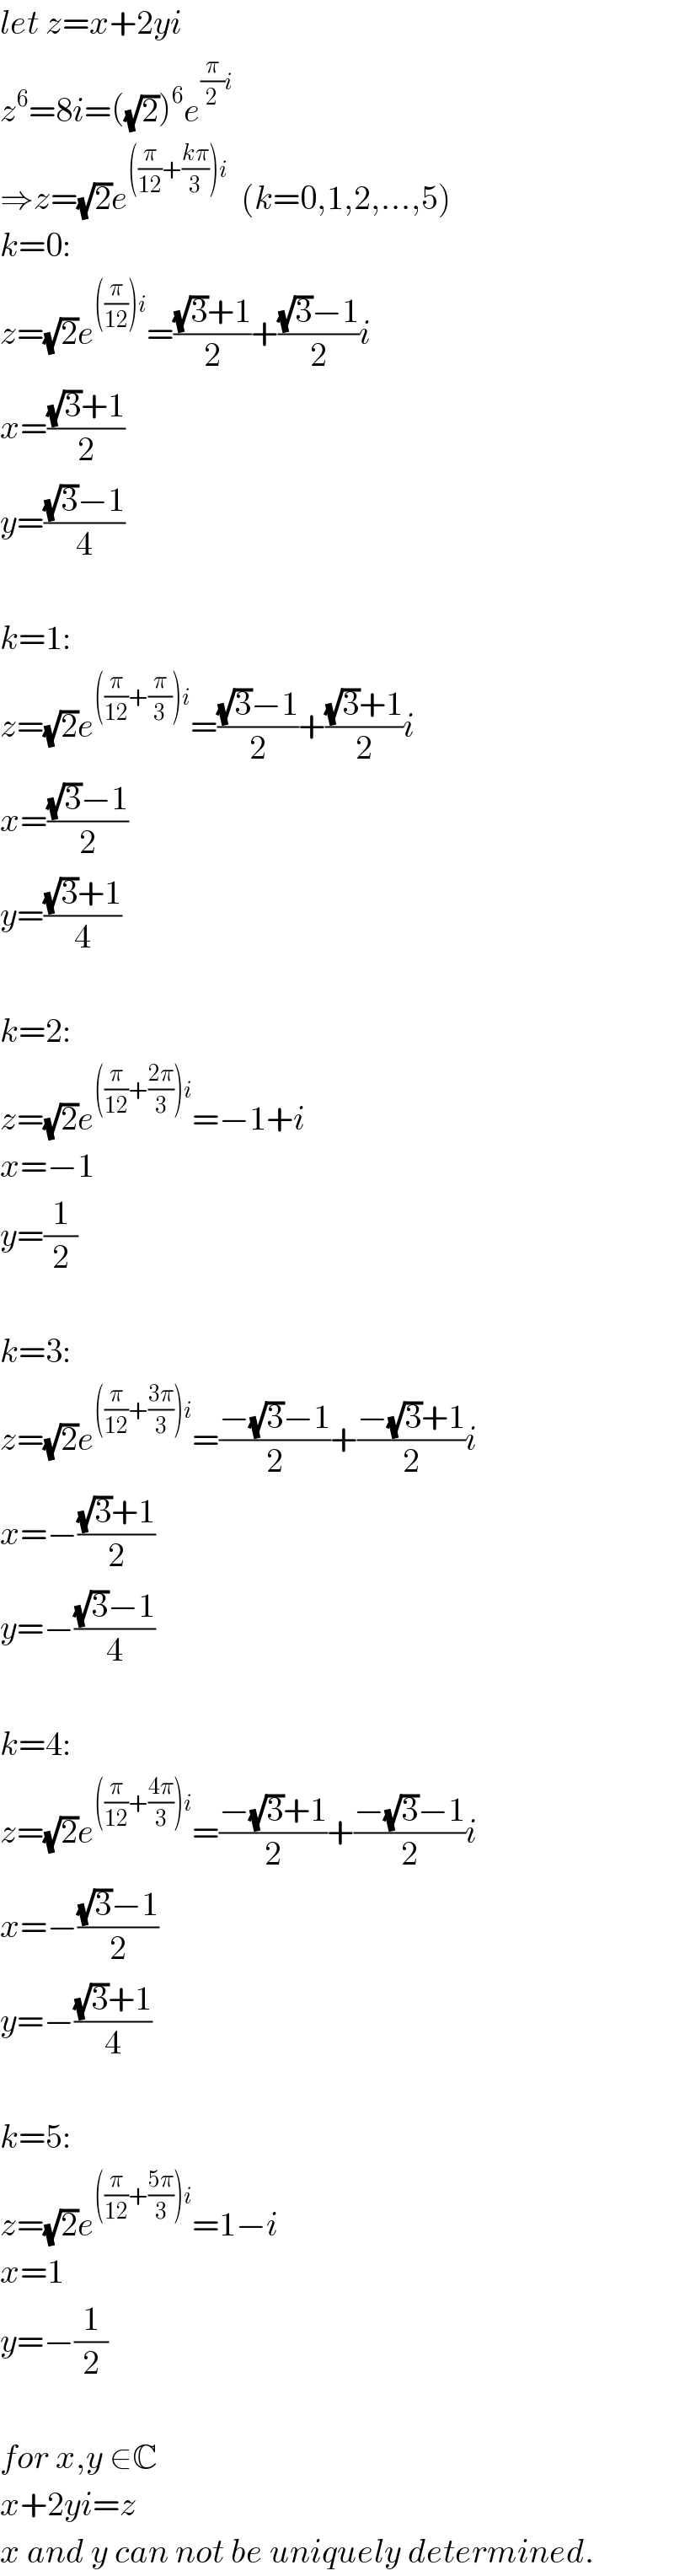 let z=x+2yi  z^6 =8i=((√2))^6 e^((π/2)i)   ⇒z=(√2)e^(((π/(12))+((kπ)/3))i)   (k=0,1,2,...,5)  k=0:  z=(√2)e^(((π/(12)))i) =(((√3)+1)/2)+(((√3)−1)/2)i  x=(((√3)+1)/2)  y=(((√3)−1)/4)    k=1:  z=(√2)e^(((π/(12))+(π/3))i) =(((√3)−1)/2)+(((√3)+1)/2)i  x=(((√3)−1)/2)  y=(((√3)+1)/4)    k=2:  z=(√2)e^(((π/(12))+((2π)/3))i) =−1+i  x=−1  y=(1/2)    k=3:  z=(√2)e^(((π/(12))+((3π)/3))i) =((−(√3)−1)/2)+((−(√3)+1)/2)i  x=−(((√3)+1)/2)  y=−(((√3)−1)/4)    k=4:  z=(√2)e^(((π/(12))+((4π)/3))i) =((−(√3)+1)/2)+((−(√3)−1)/2)i  x=−(((√3)−1)/2)  y=−(((√3)+1)/4)    k=5:  z=(√2)e^(((π/(12))+((5π)/3))i) =1−i  x=1  y=−(1/2)    for x,y ∈C  x+2yi=z  x and y can not be uniquely determined.  